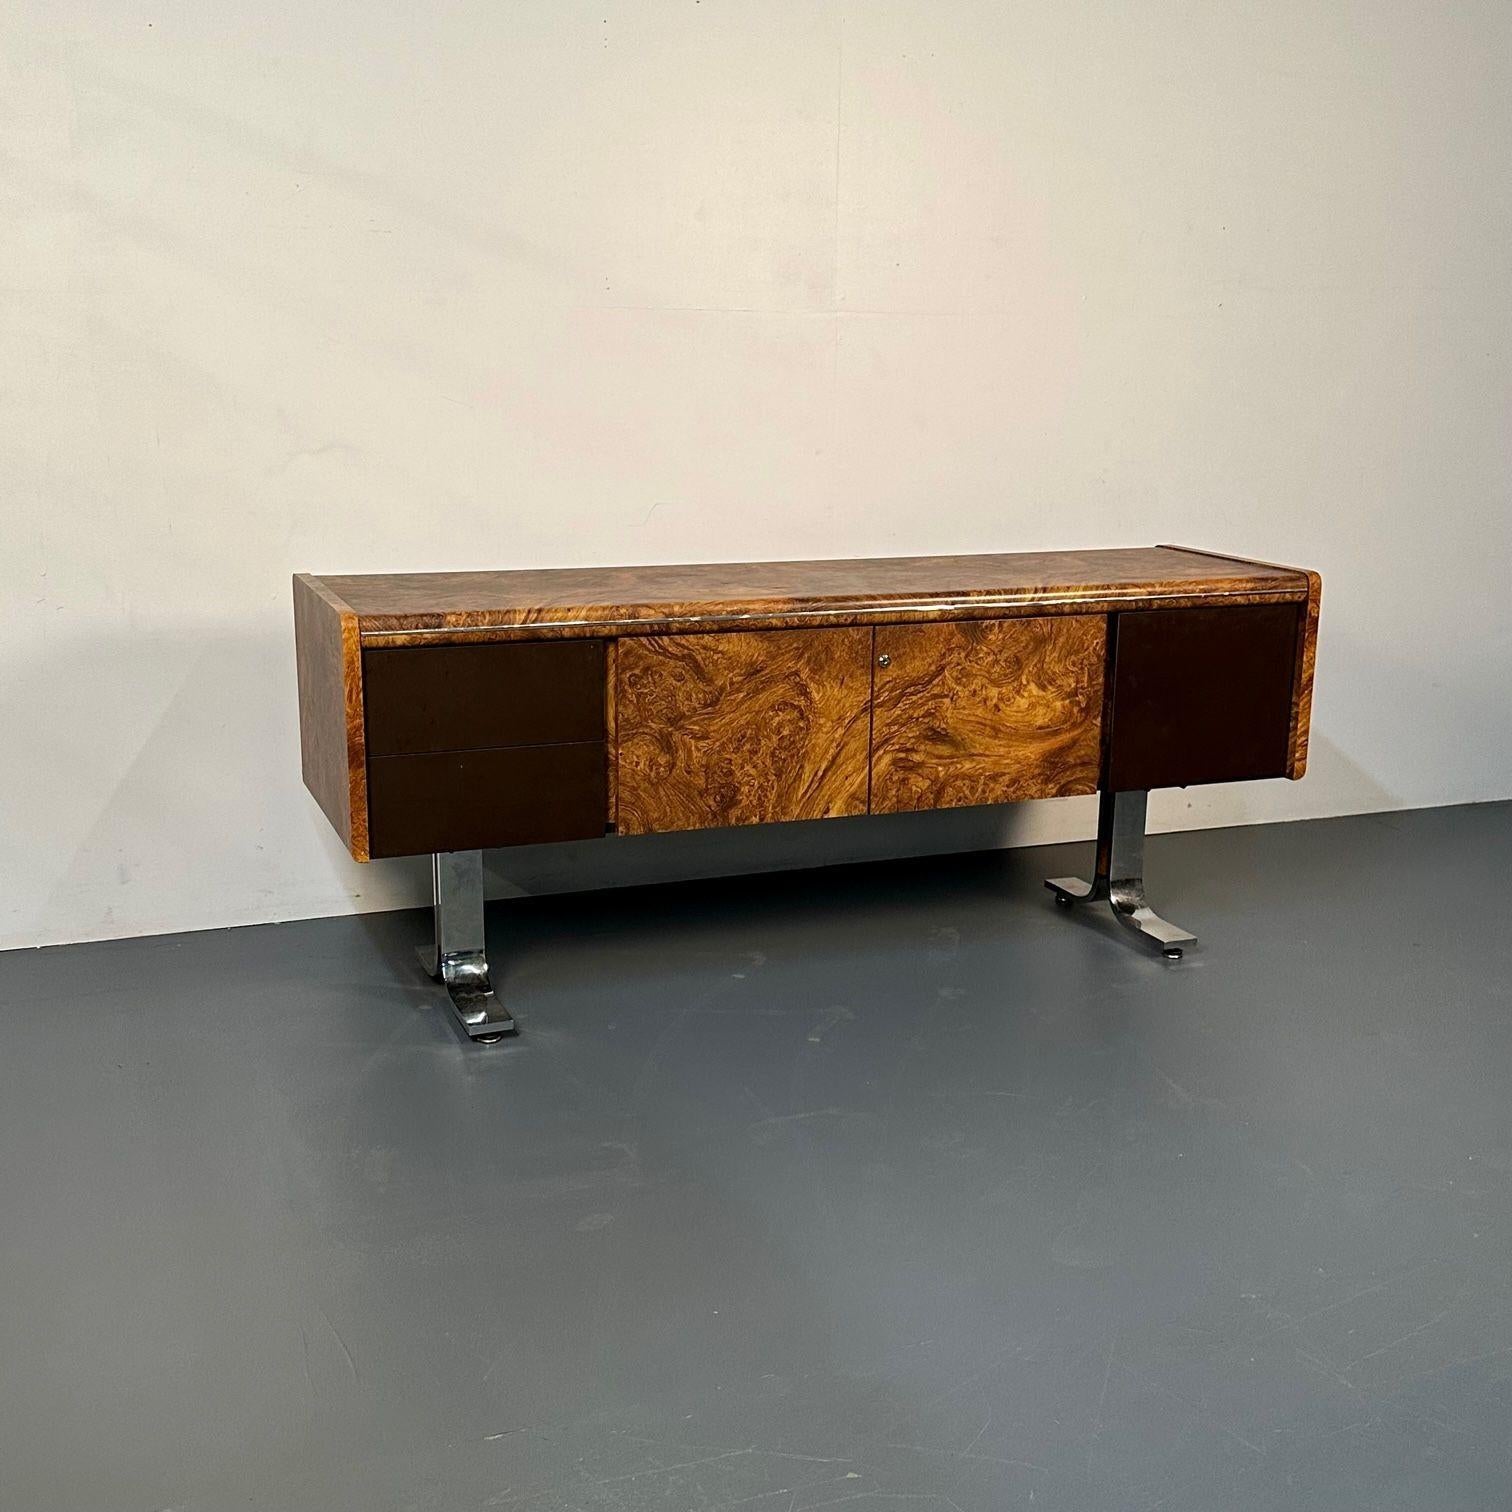 Leif Jacobsen Style, Mid-Century Modern, Credenza, Burlwood, Canada, 1950s For Sale 3